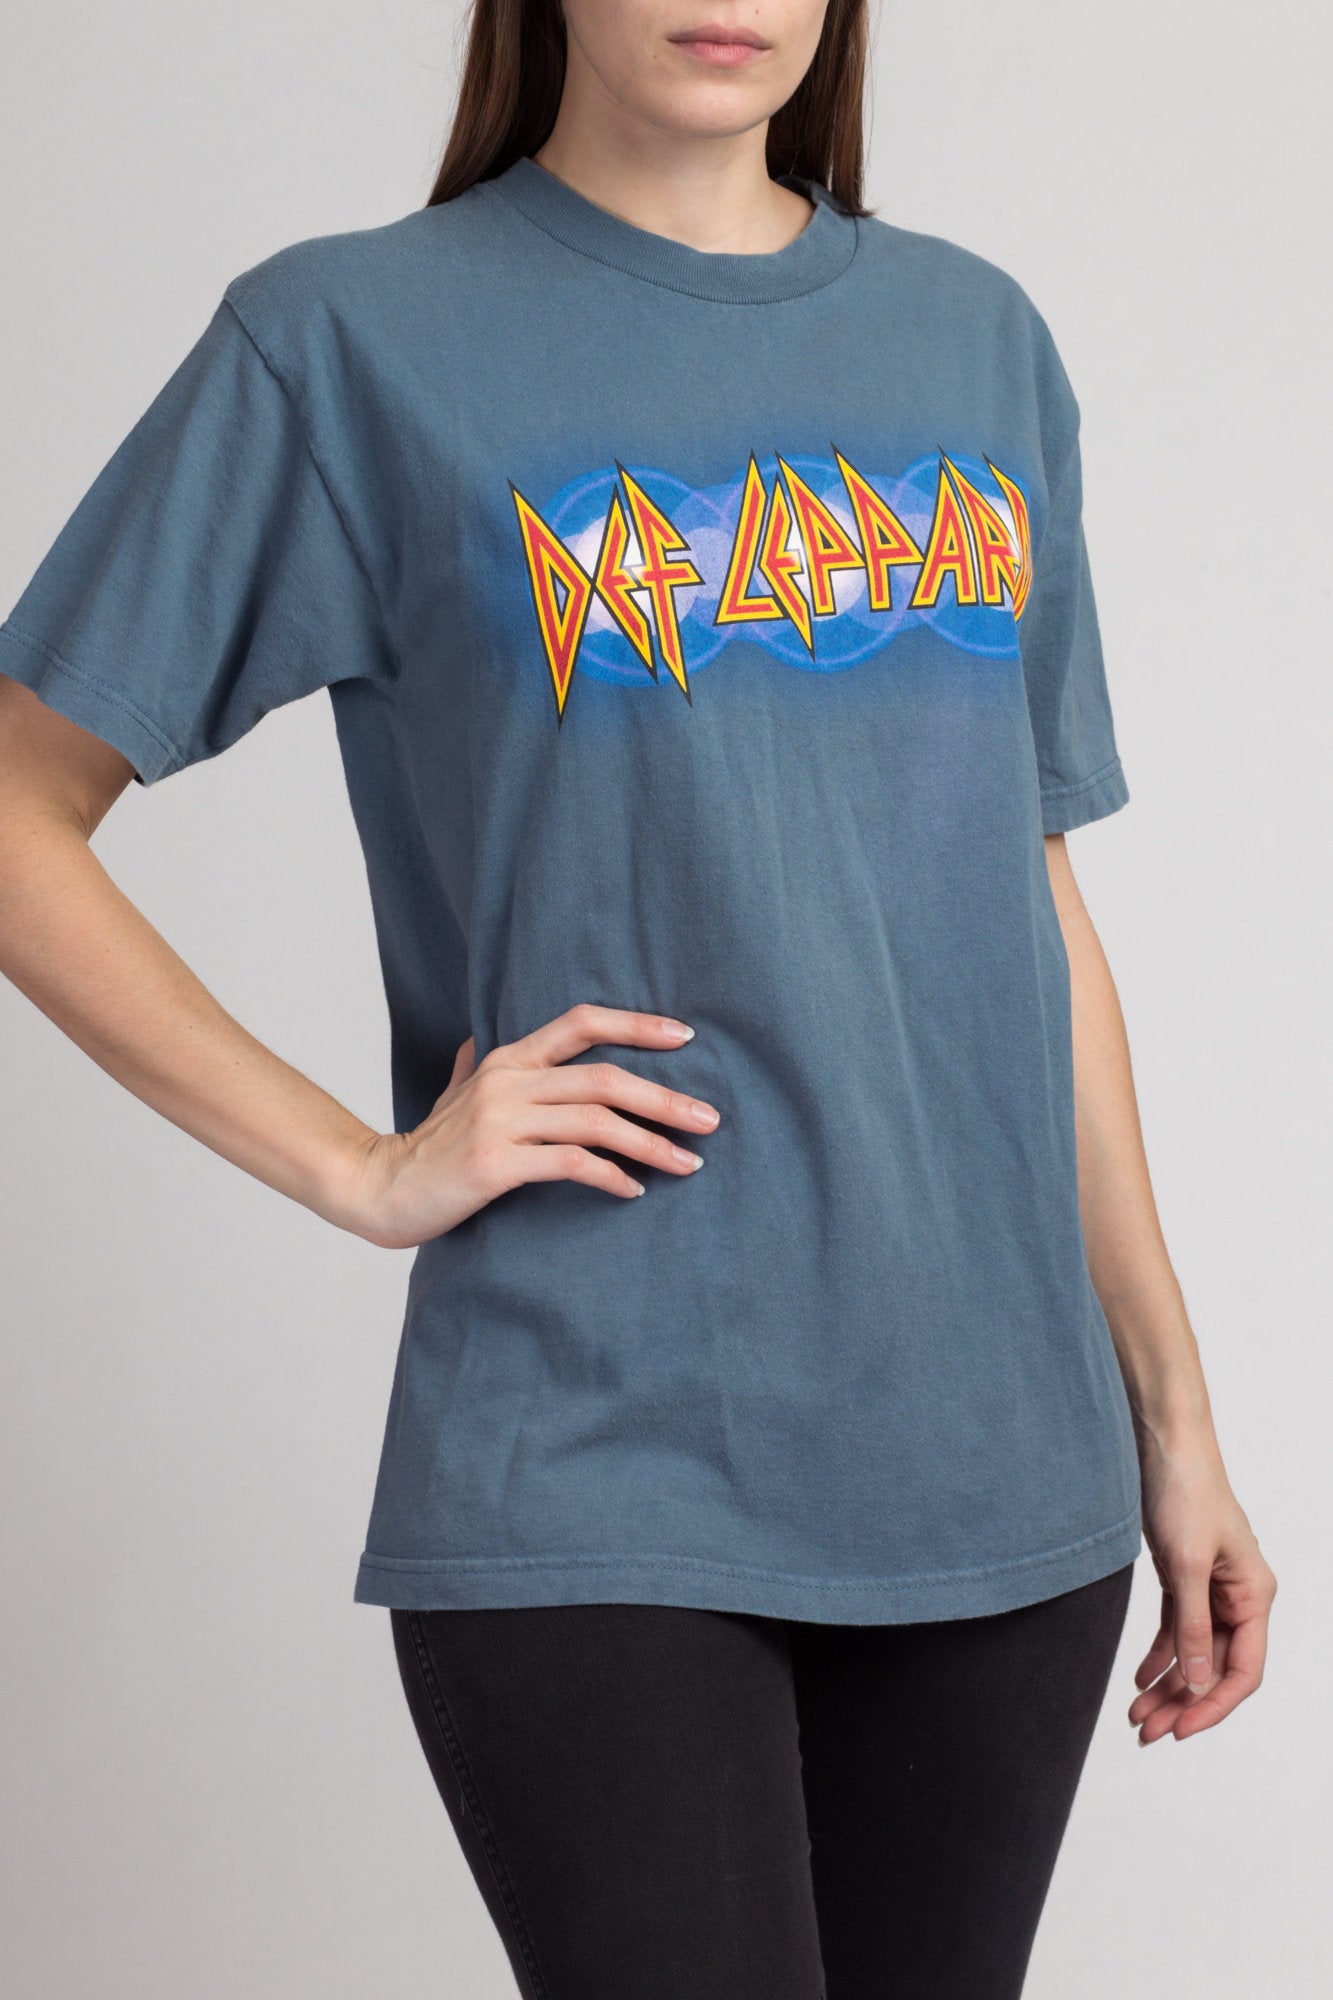 90s giant ジャイアント def leppard band t バンドt-